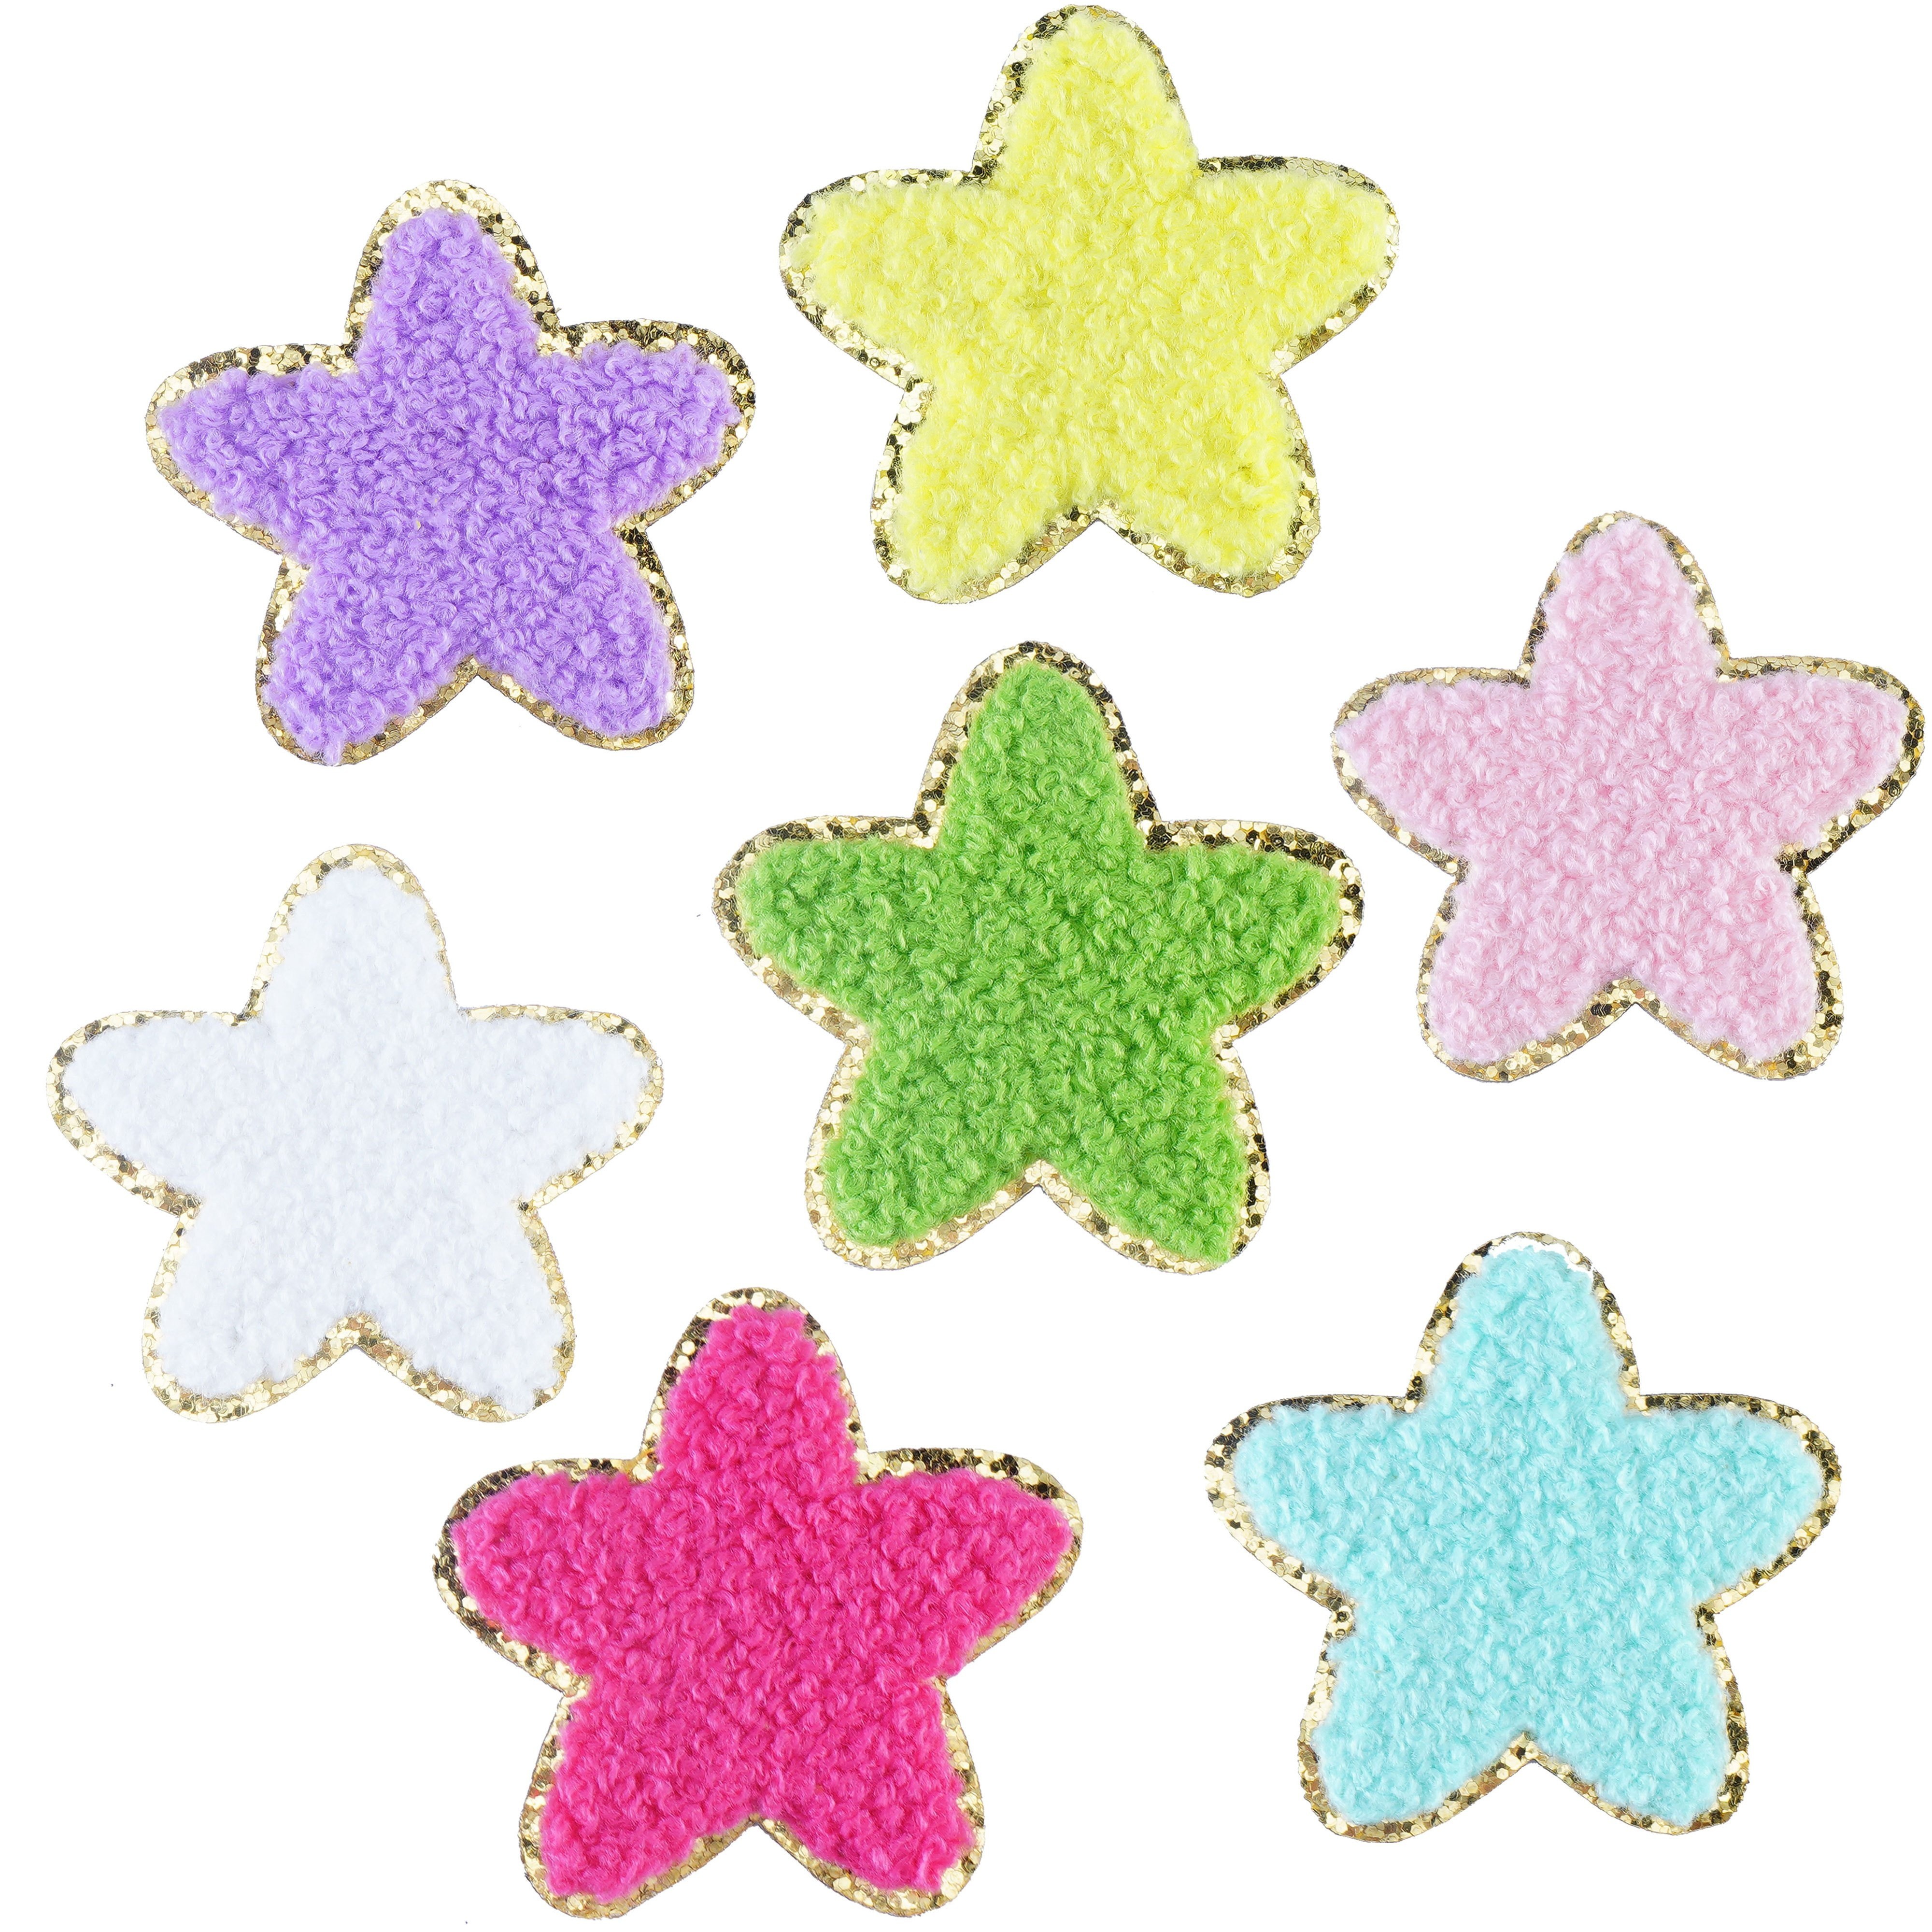  SEWACC 10pc Sequin Decorative Patch Sequin Embroidered Badge  DIY Sew on Patches Sewing Star Applique Colored Embroidery Patches for  Sequin Pentagram Patch Decor for Home Adhesive Repair : Arts, Crafts 